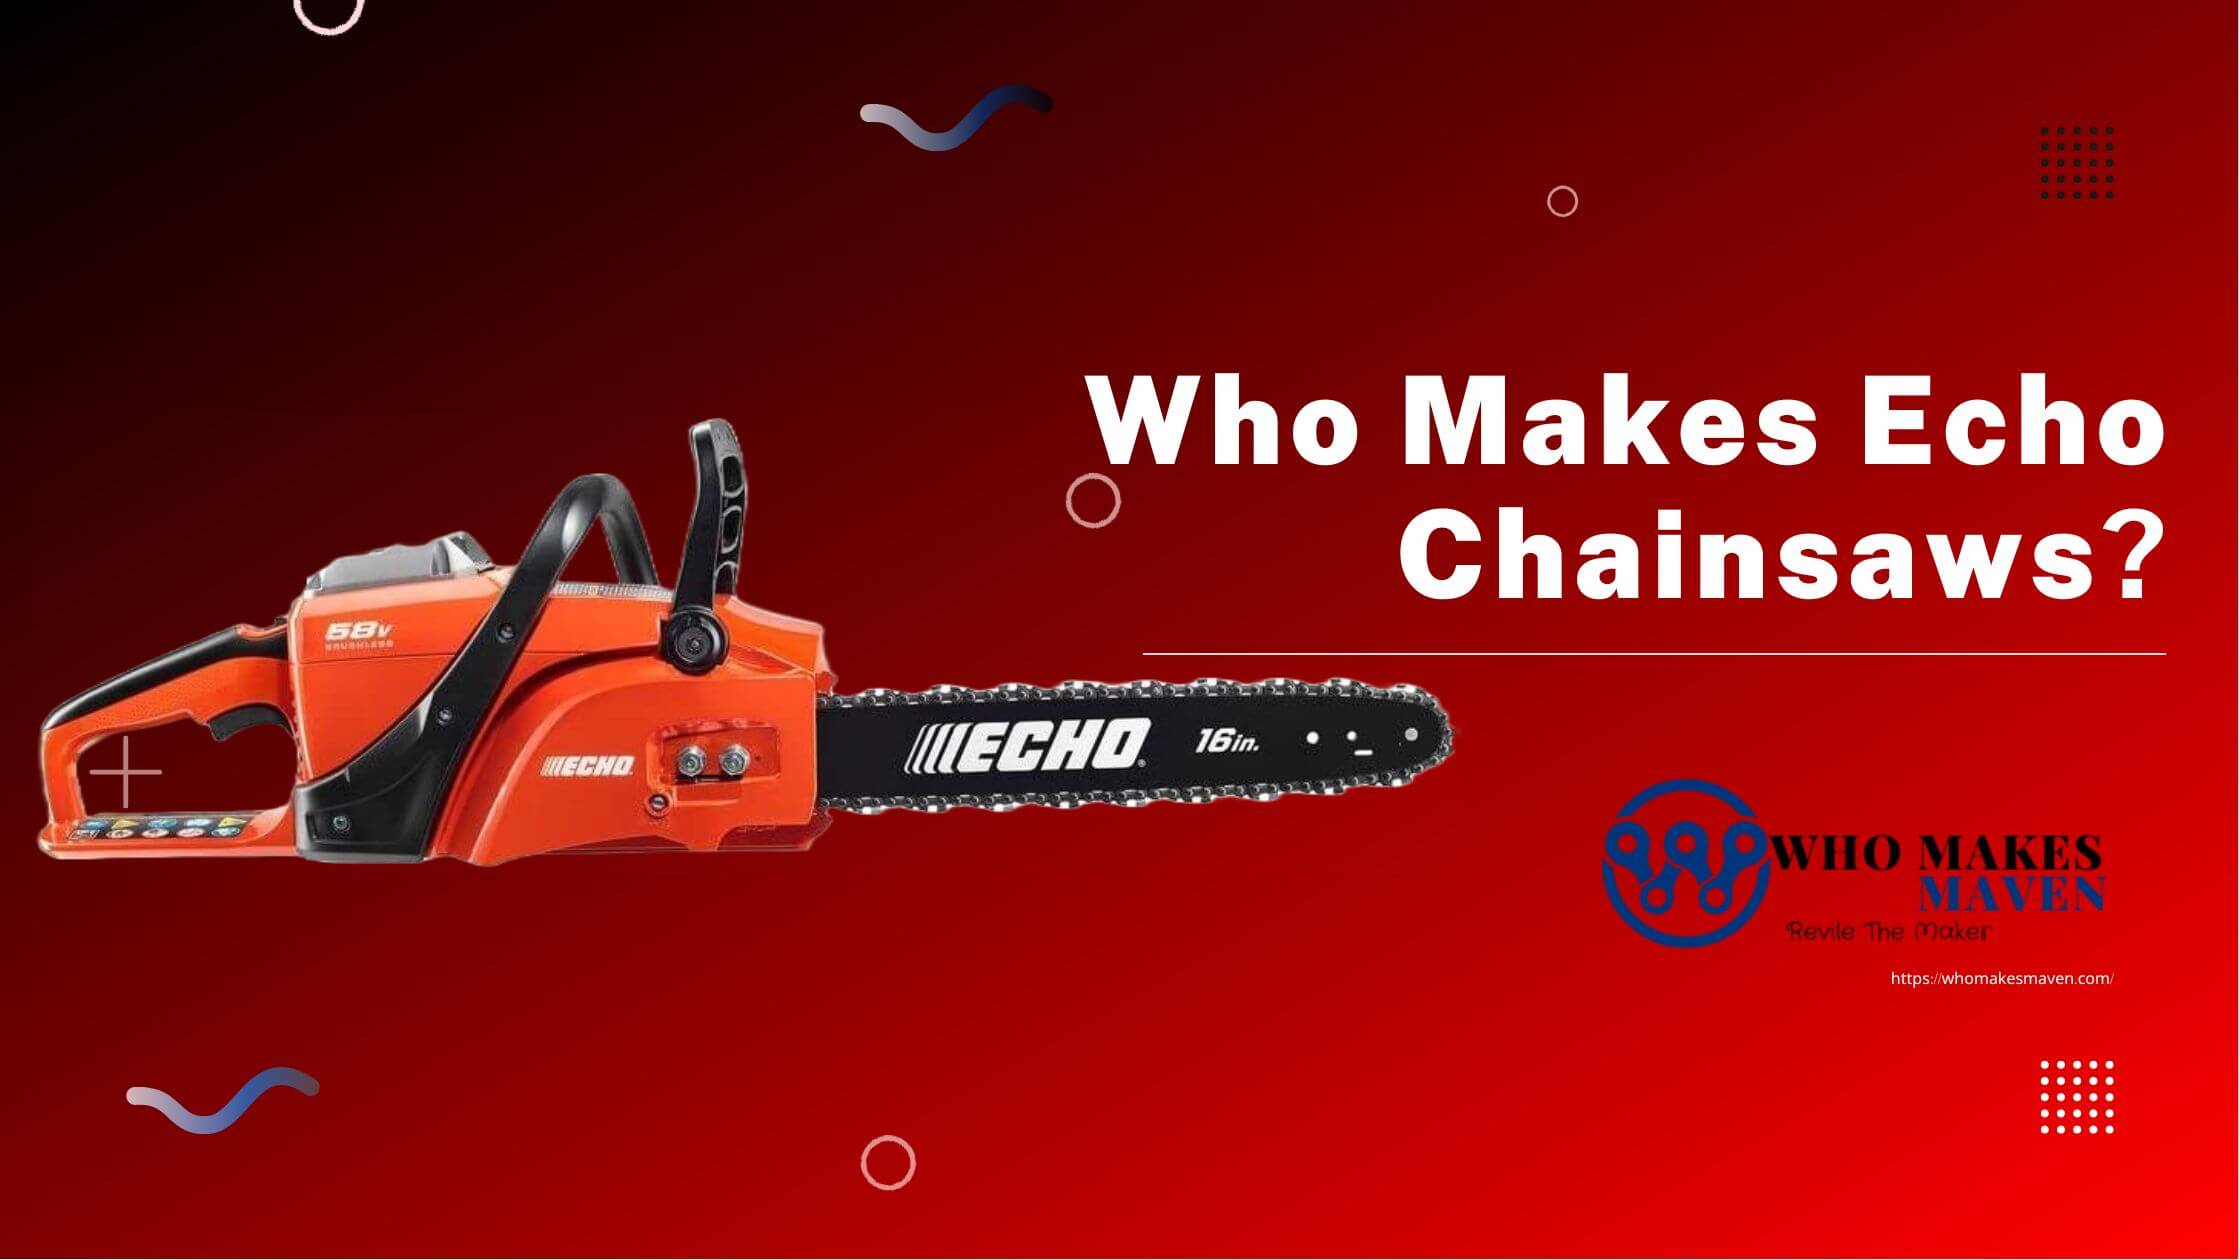 Who Makes Echo Chainsaws